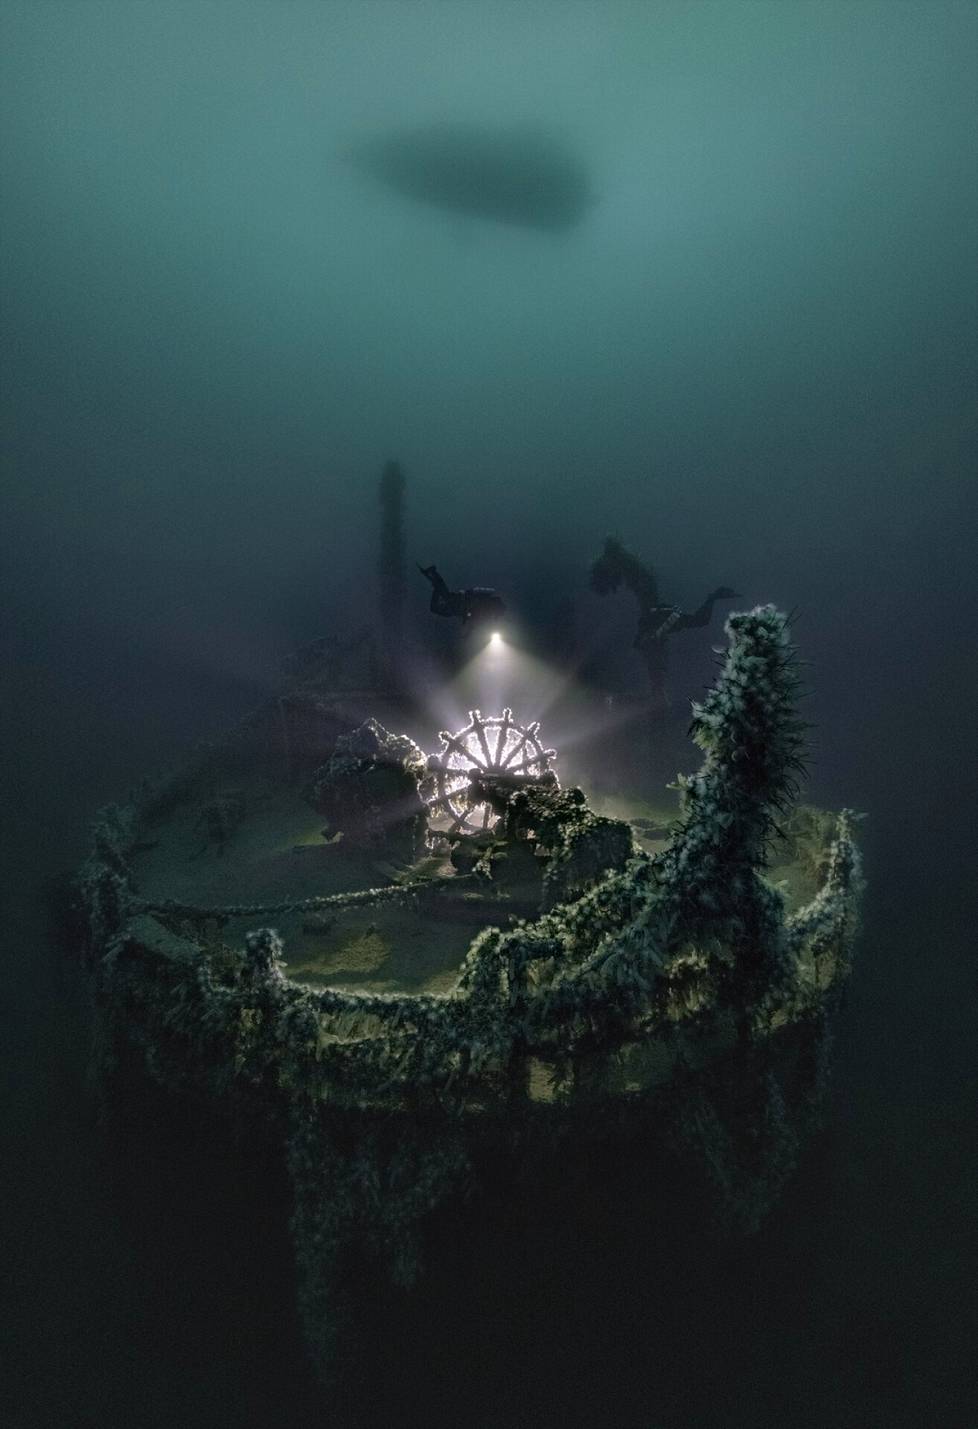 The best of the wreckage series was the picture of Abandoned Ship by the Swedish Alex Dawson, in which the Norwegian Tyrifjord emerges as a diver in the light.